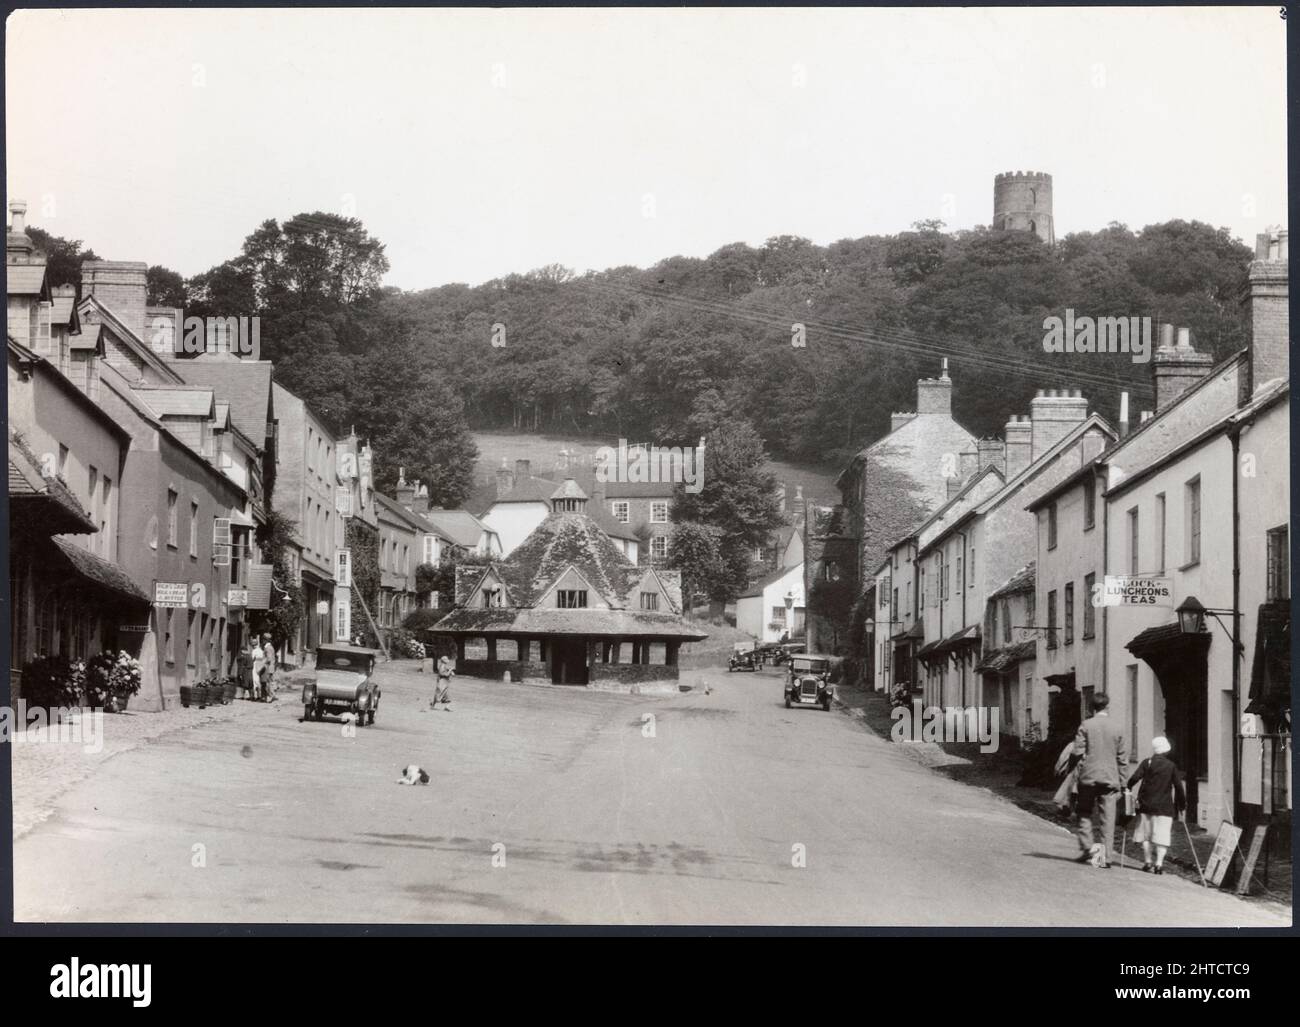 Yarn Market, High Street, Dunster, Somerset, 1925-1935. A view looking north along Dunster High Street towards the Yarn Market with Conygar Tower on the hillside in the distance. During the medieval period Dunster became a centre for woollen production but by the 15th century it's significance was beginning to decline. The Yarn Market is believed to date from c1609 and was constructed by George Luttrell as a means to stem this decline and maintain the importance of Dunster as a market town. The folly Conygar Tower was built in 1775 for Henry Fownes Luttrell (c1722-1780), who became legal owner Stock Photo